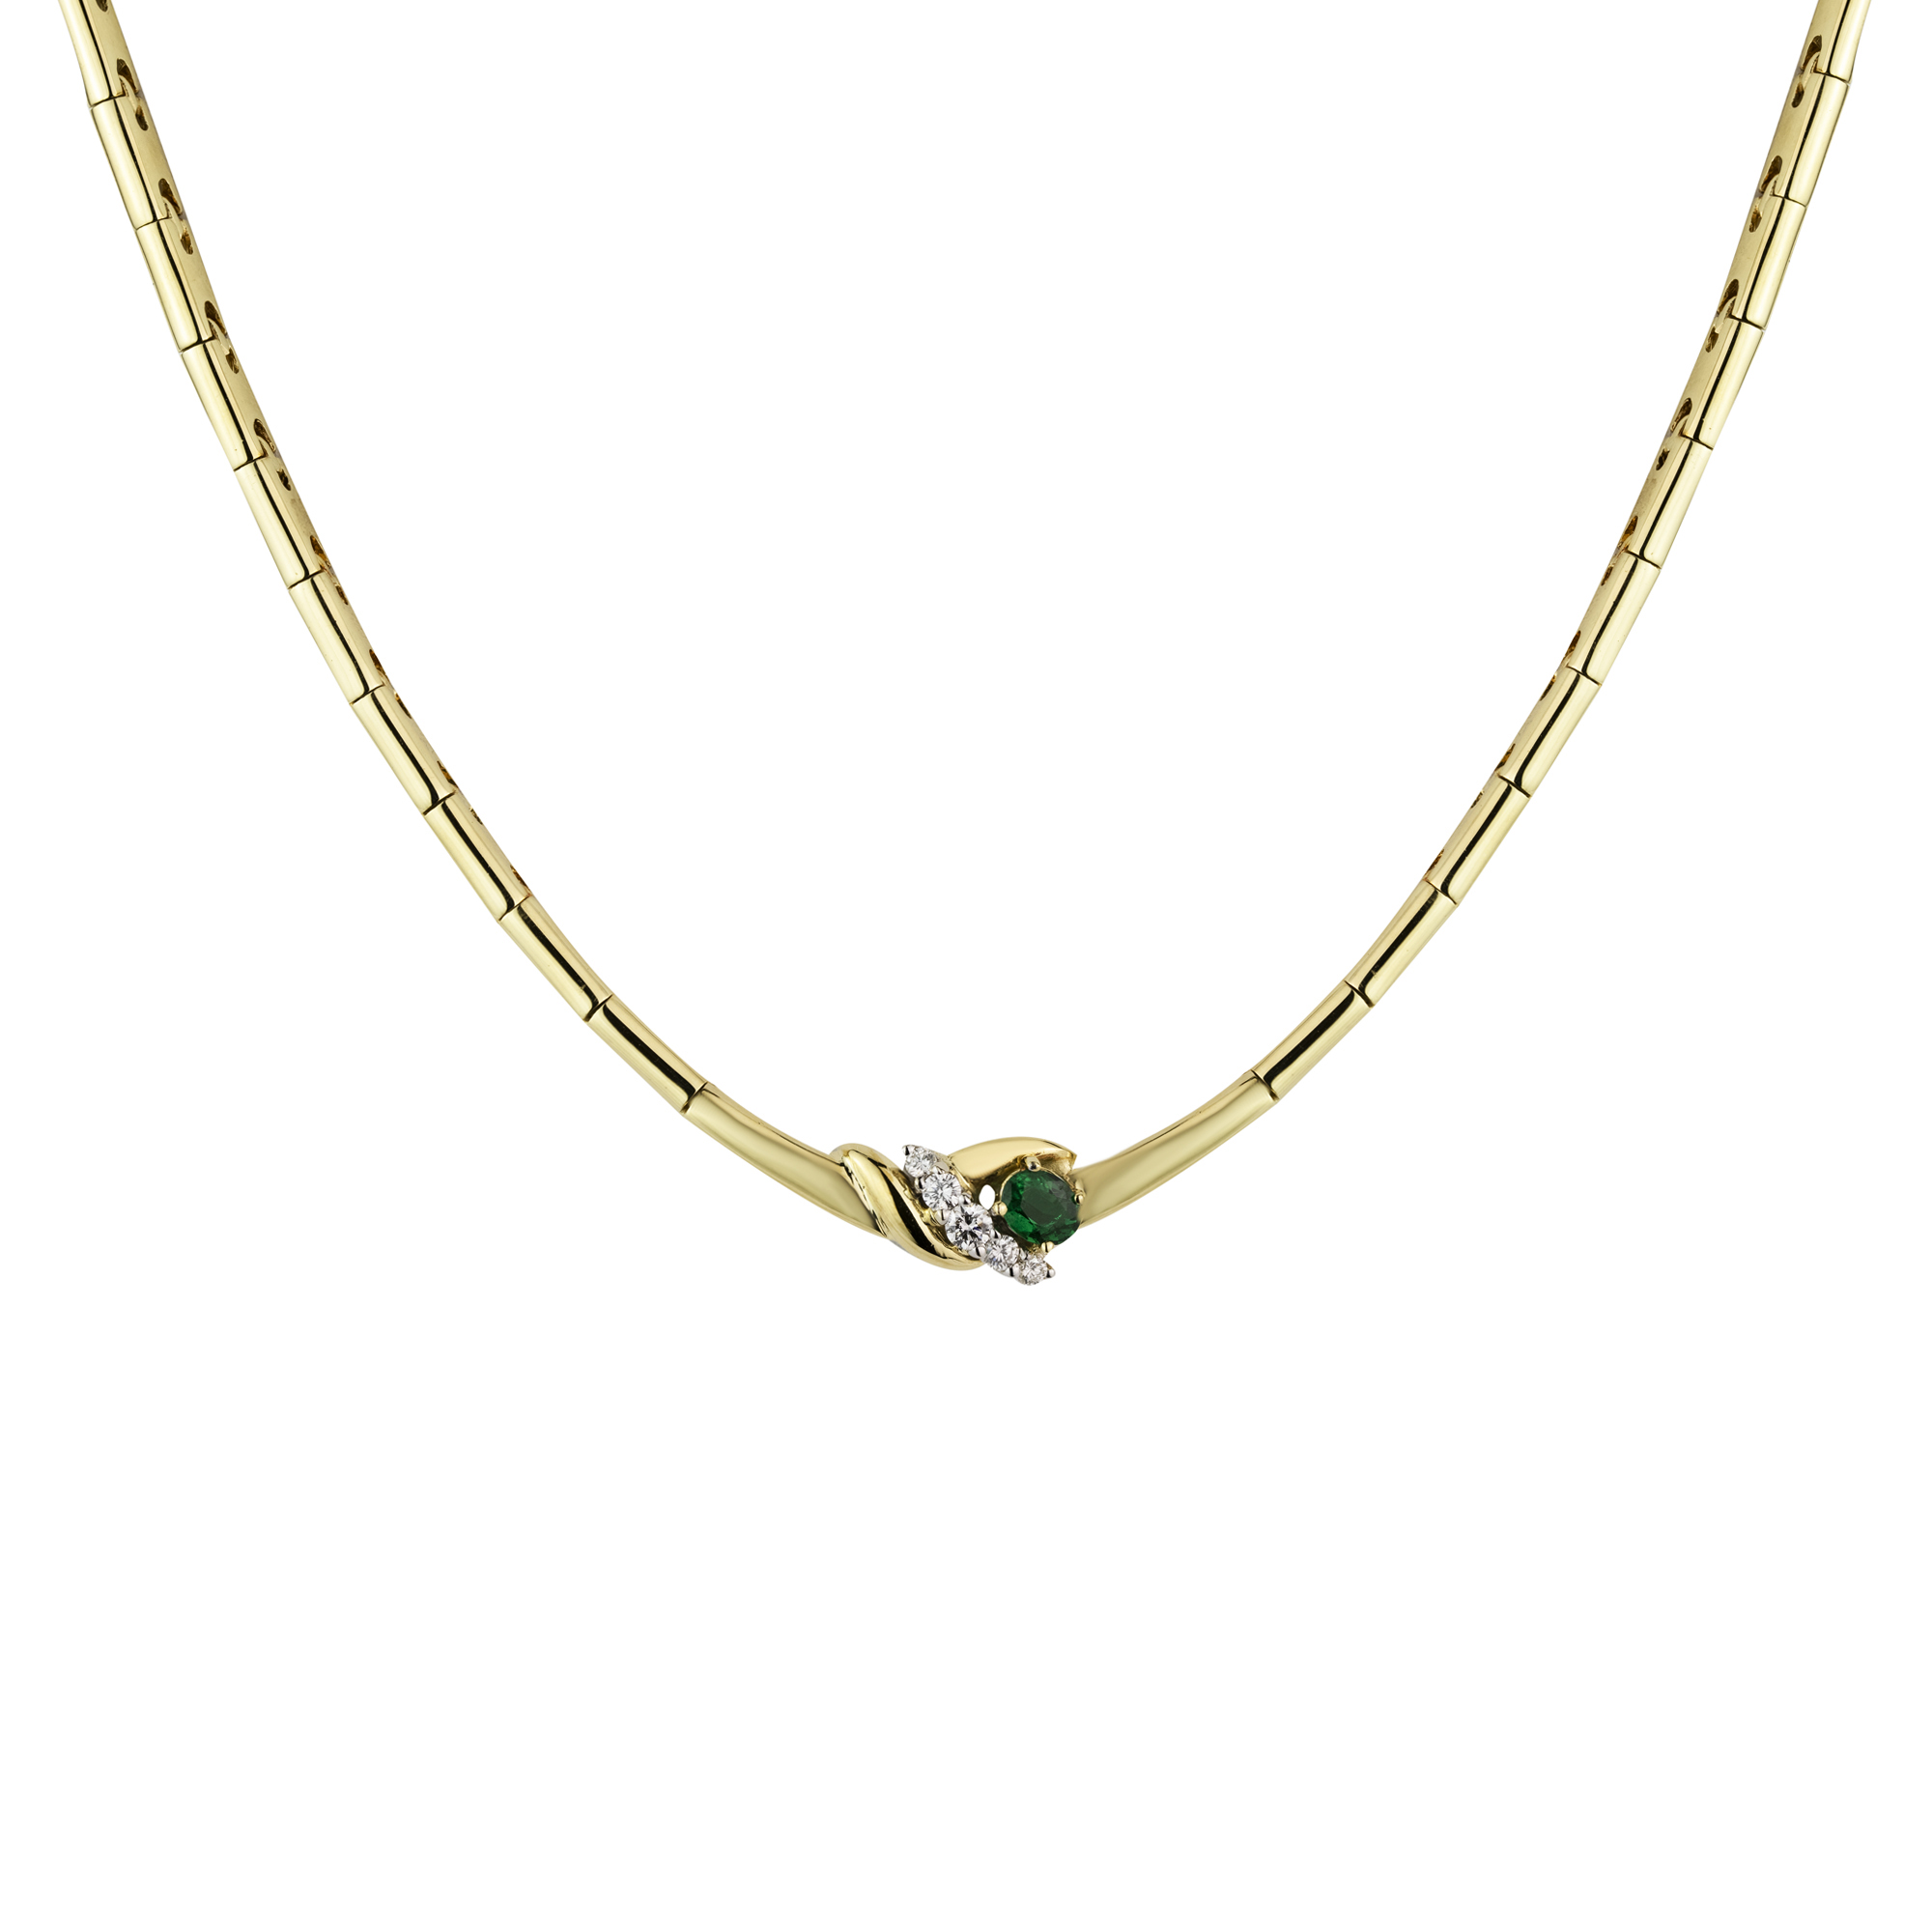 An 18ct yellow gold diamond and emerald necklace